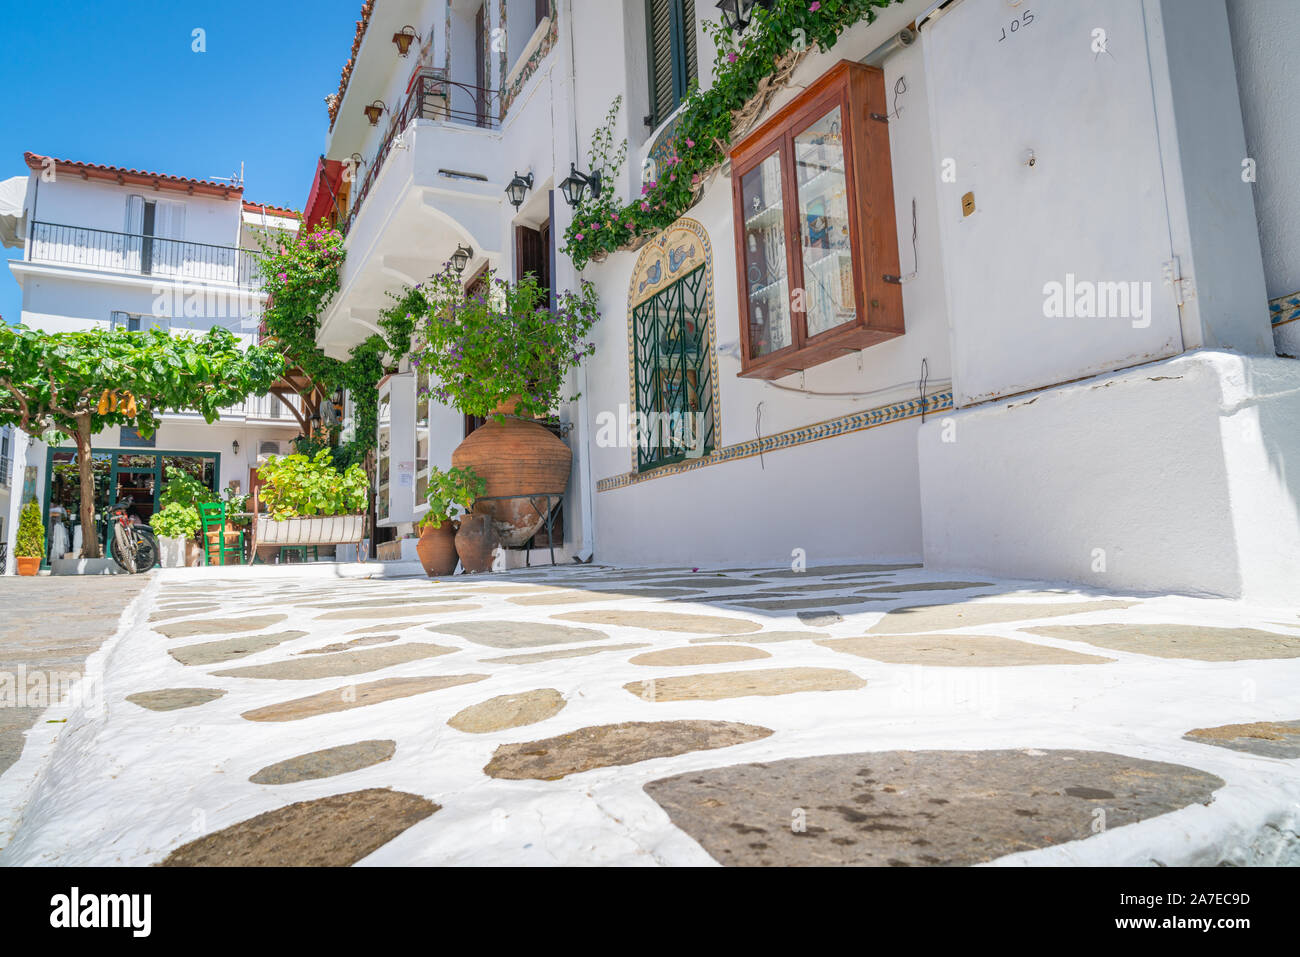 SKIATHOS GREECE - JULY 30 2019; Crazy paving leading past large terra cotta urn to green chairs. Stock Photo